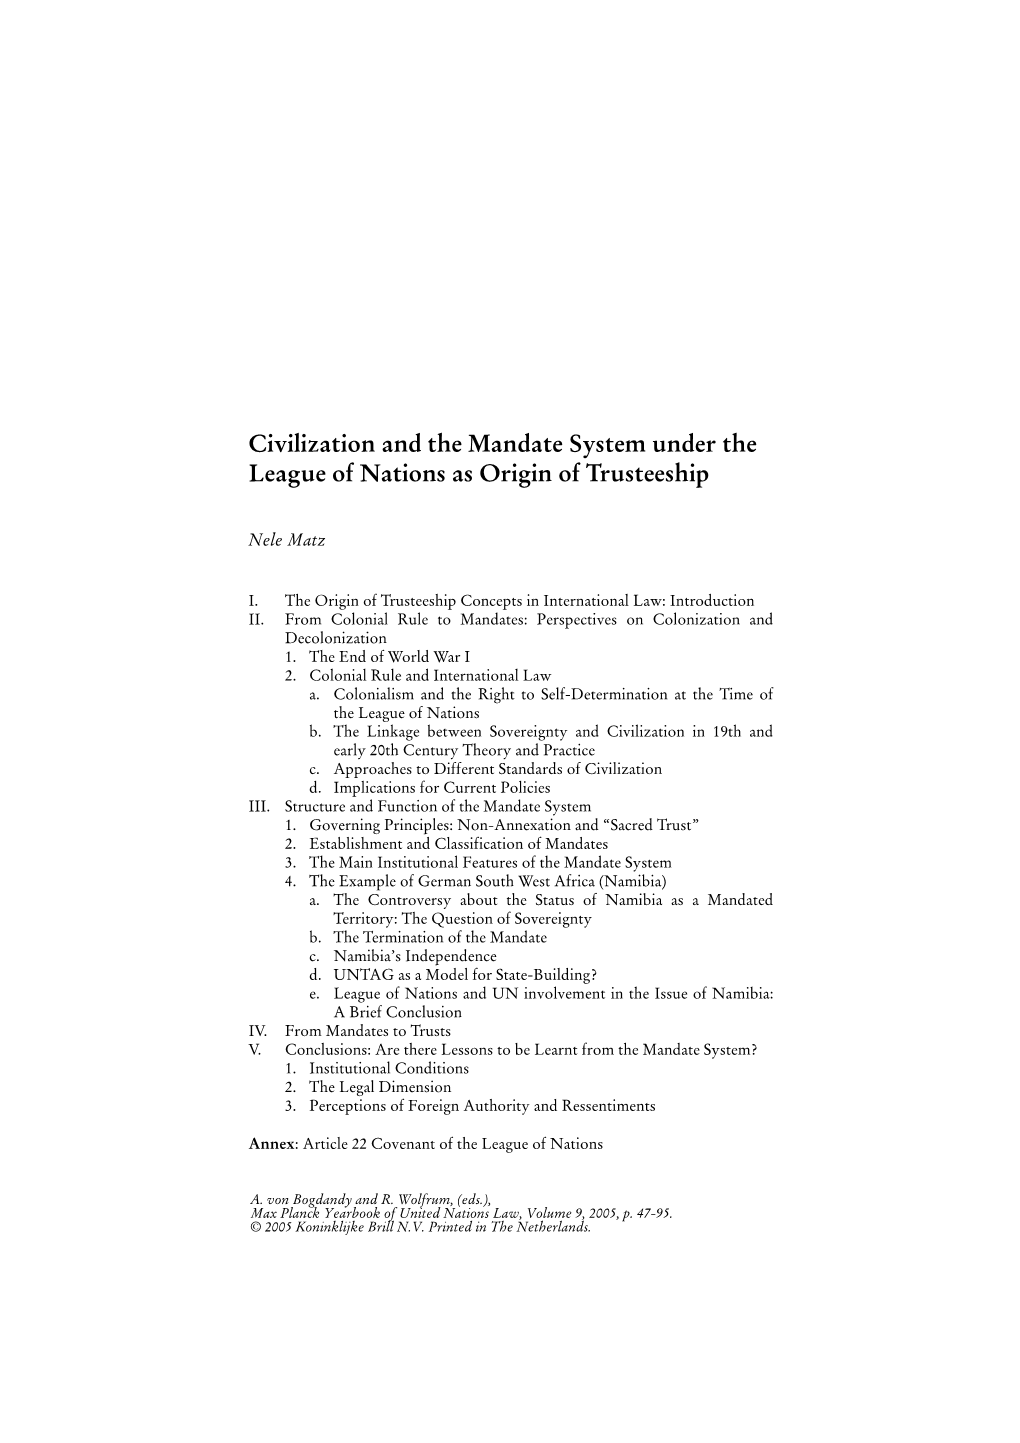 Civilization and the Mandate System Under the League of Nations As Origin of Trusteeship